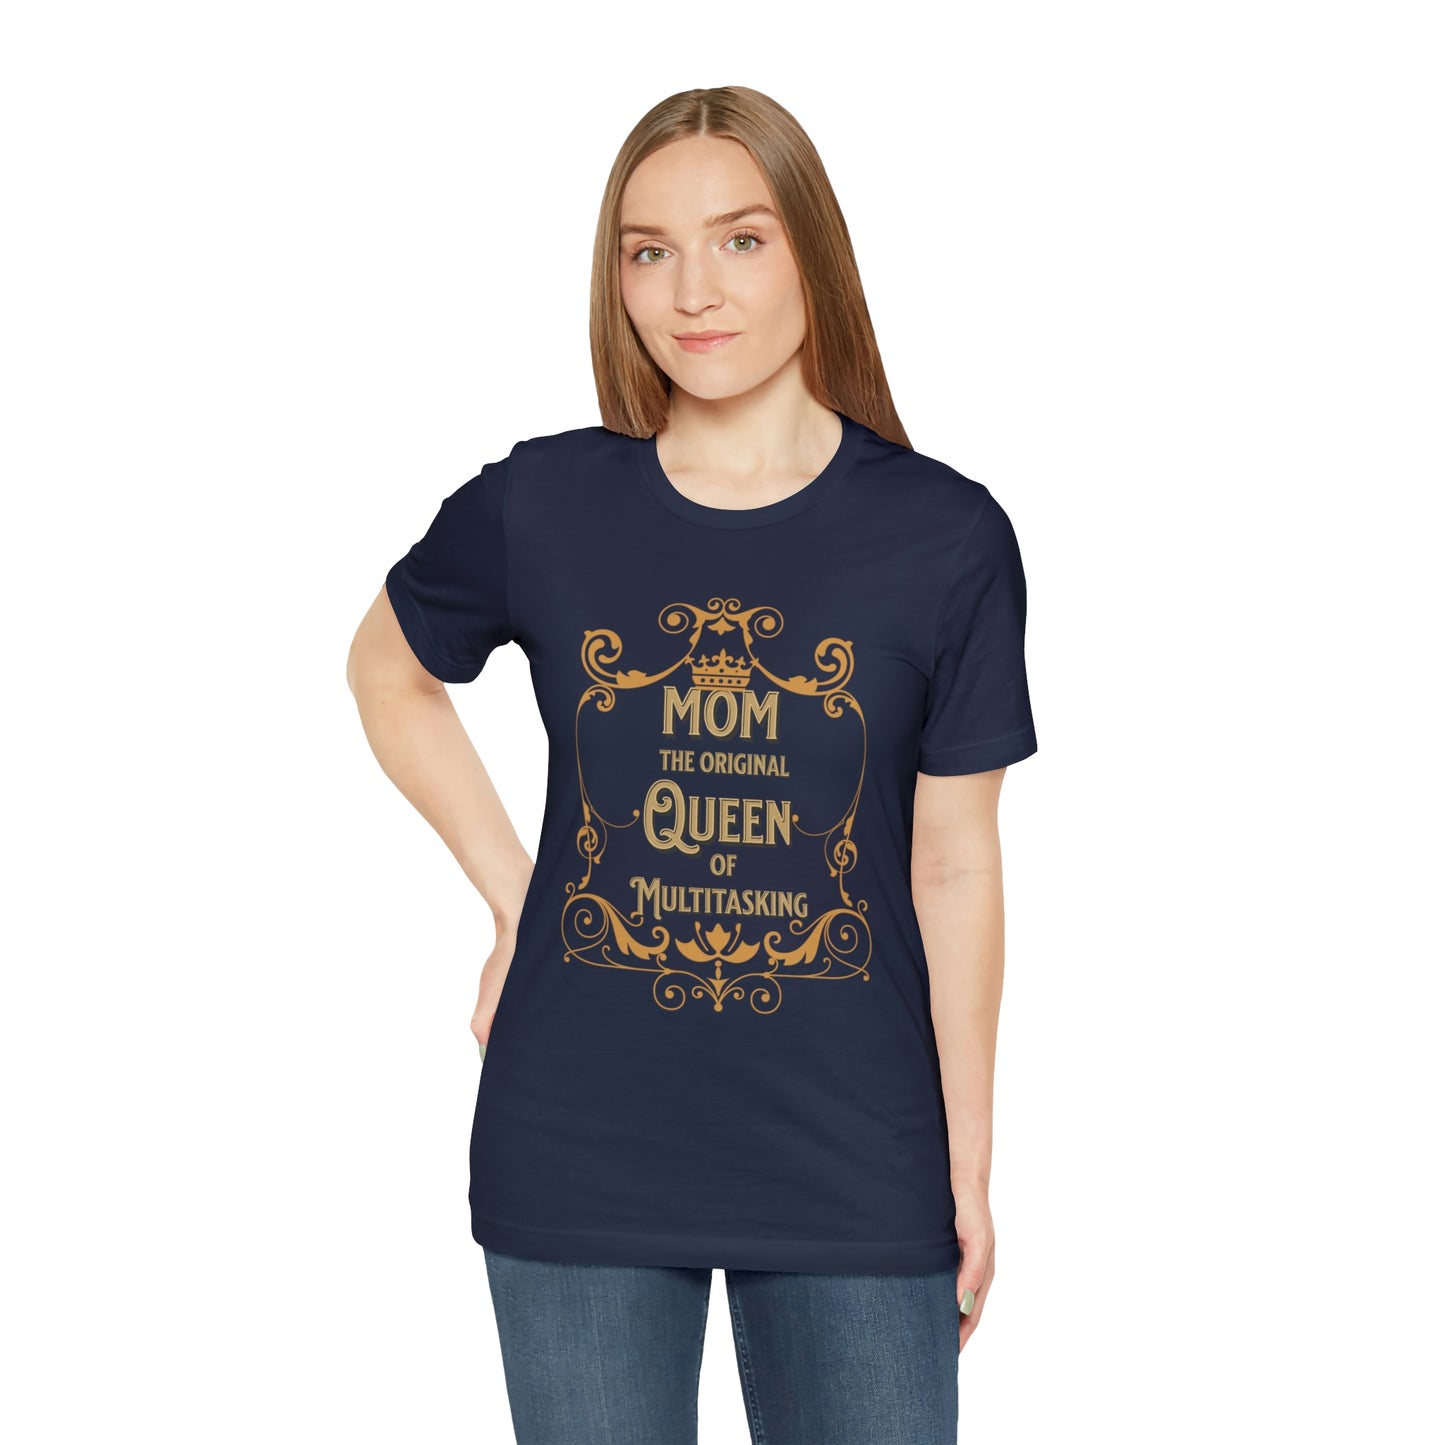 Women's Softstyle Tee,  Mom the Original Queen of Multitasking, Gift for Mom, Mother's Day T-Shirt